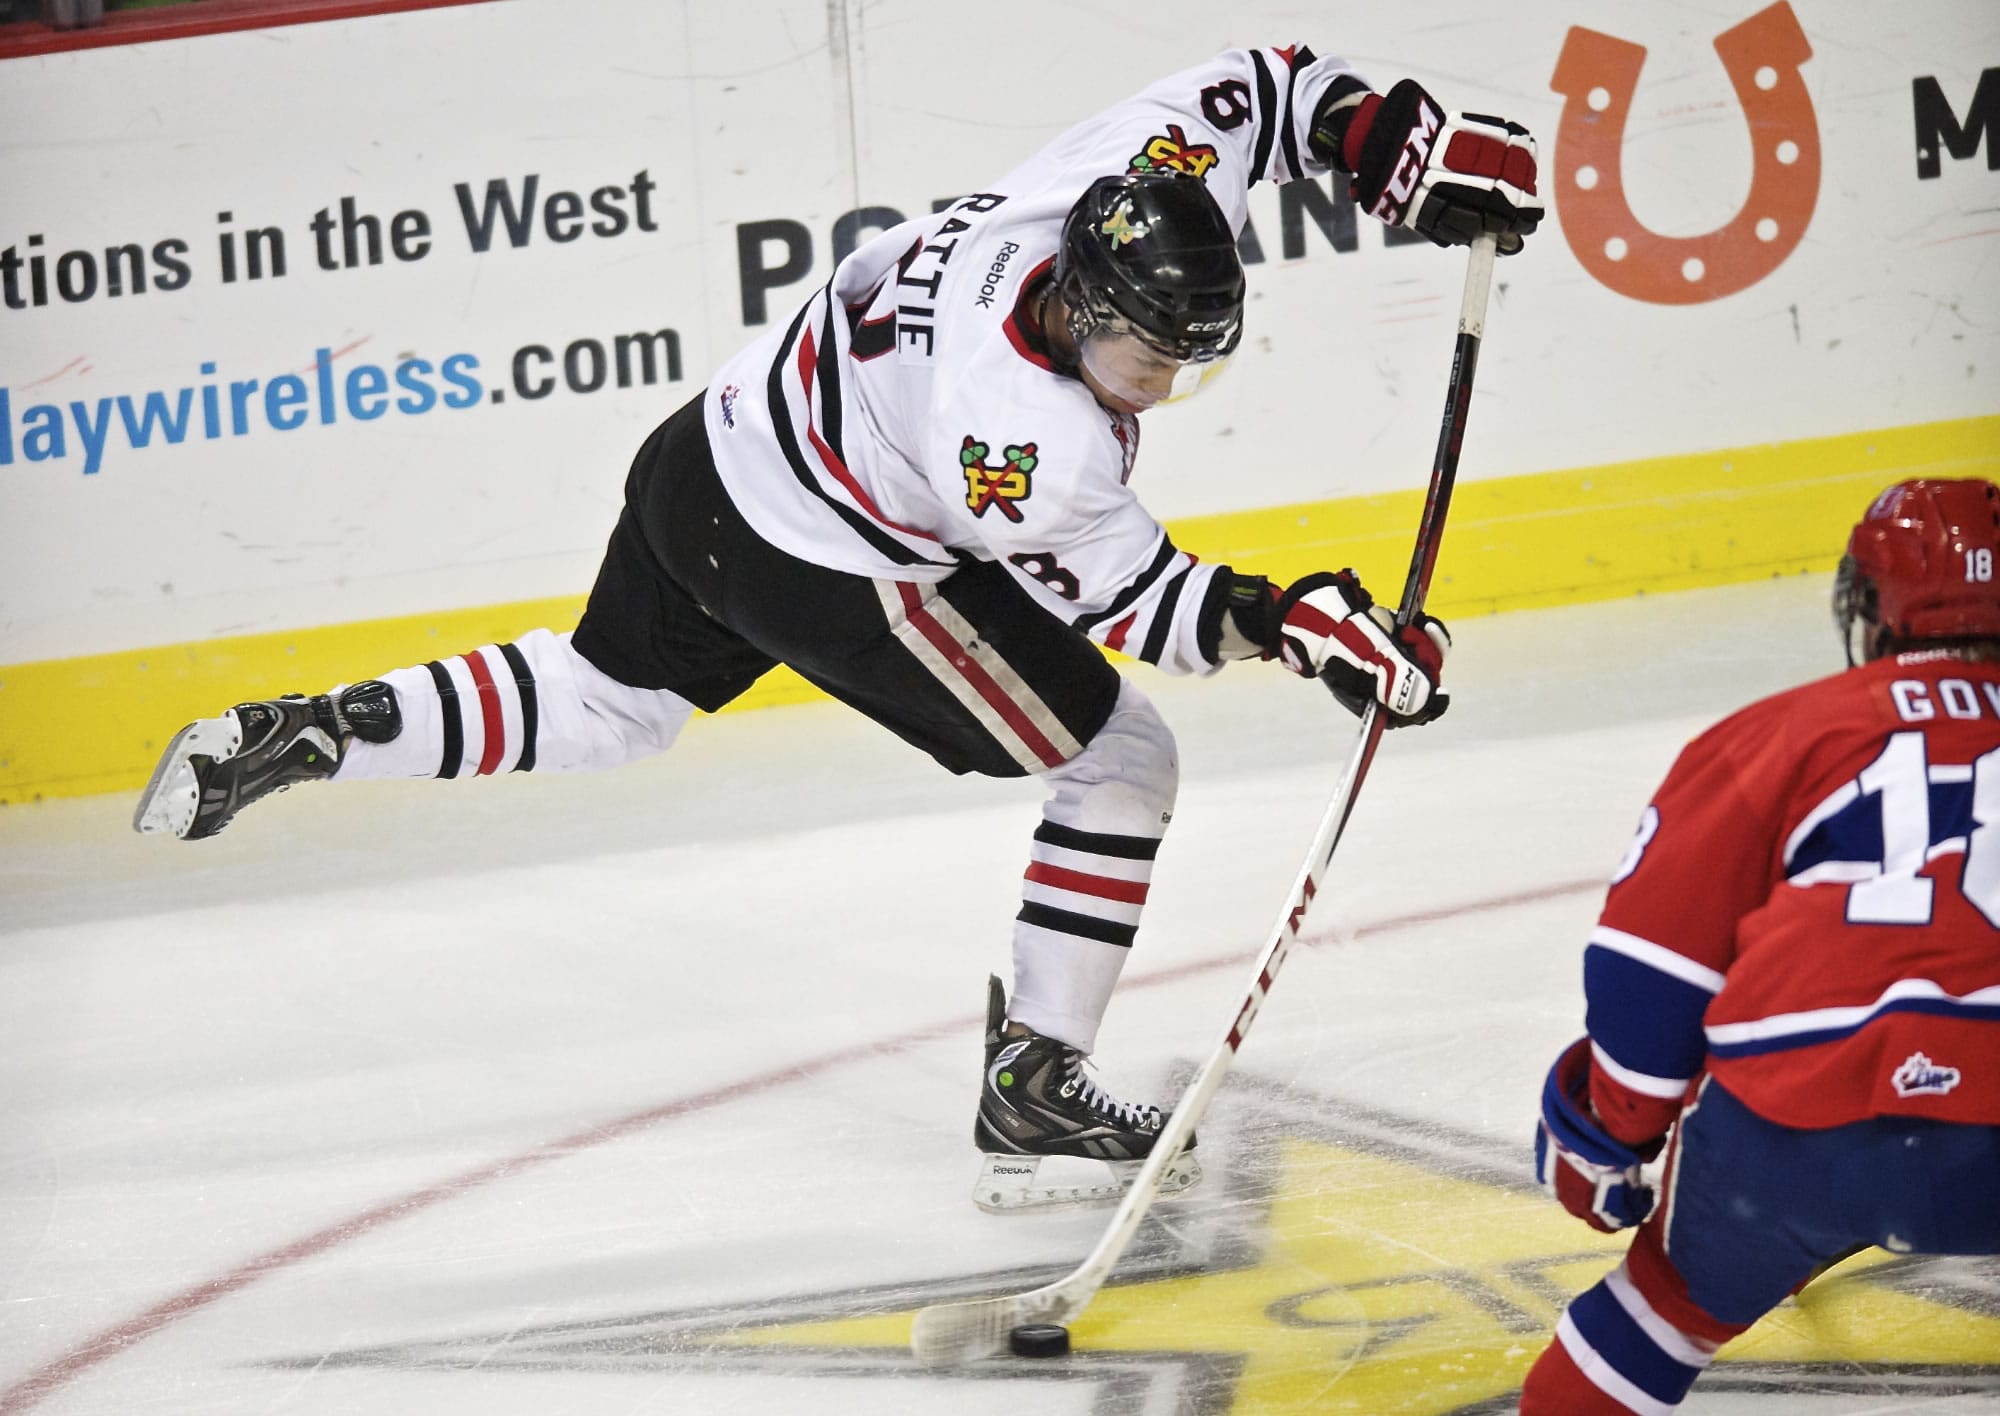 Portland's Ty Rattie will be expected to play a key role in the Winterhawks' conference finals against Kamloops.